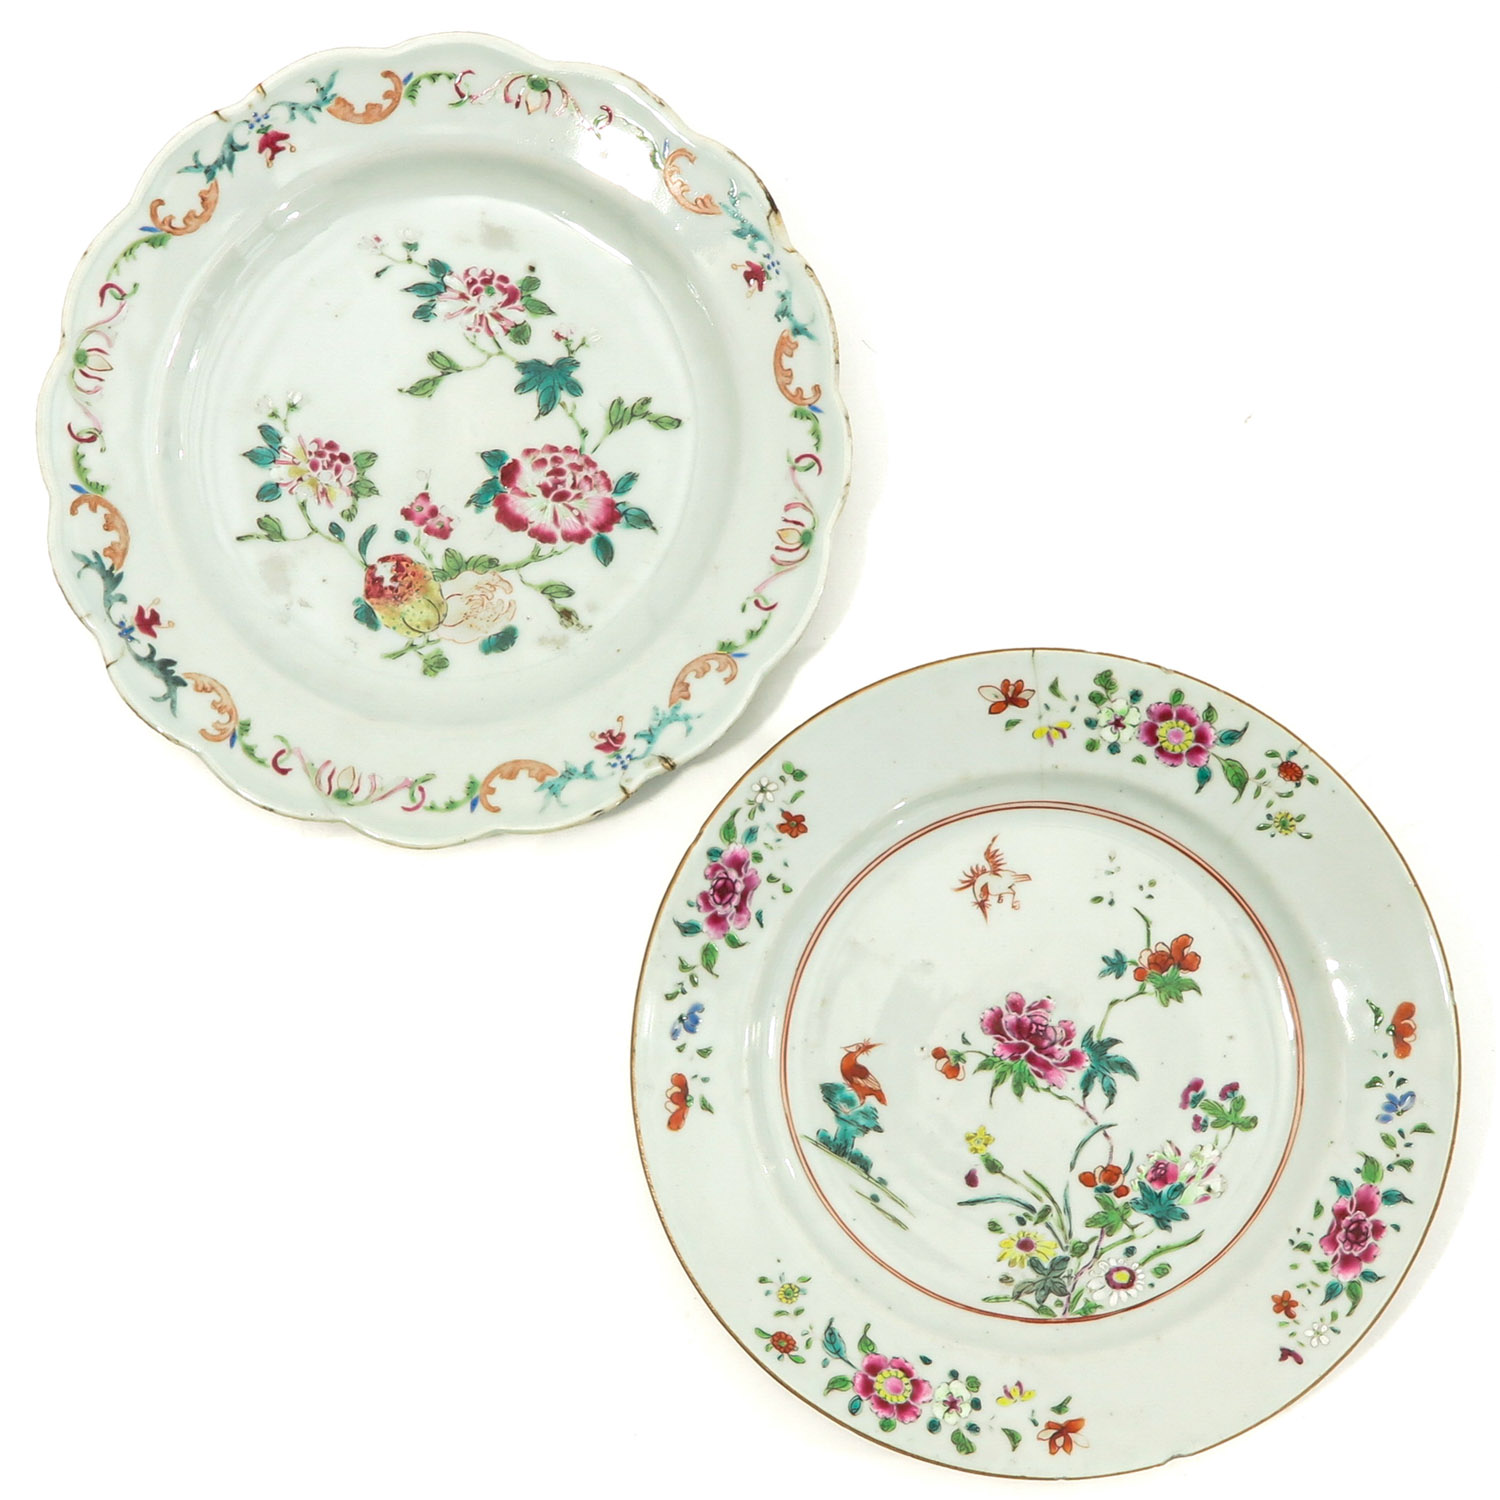 A Collection of 4 Famille Rose Plates - Image 3 of 10